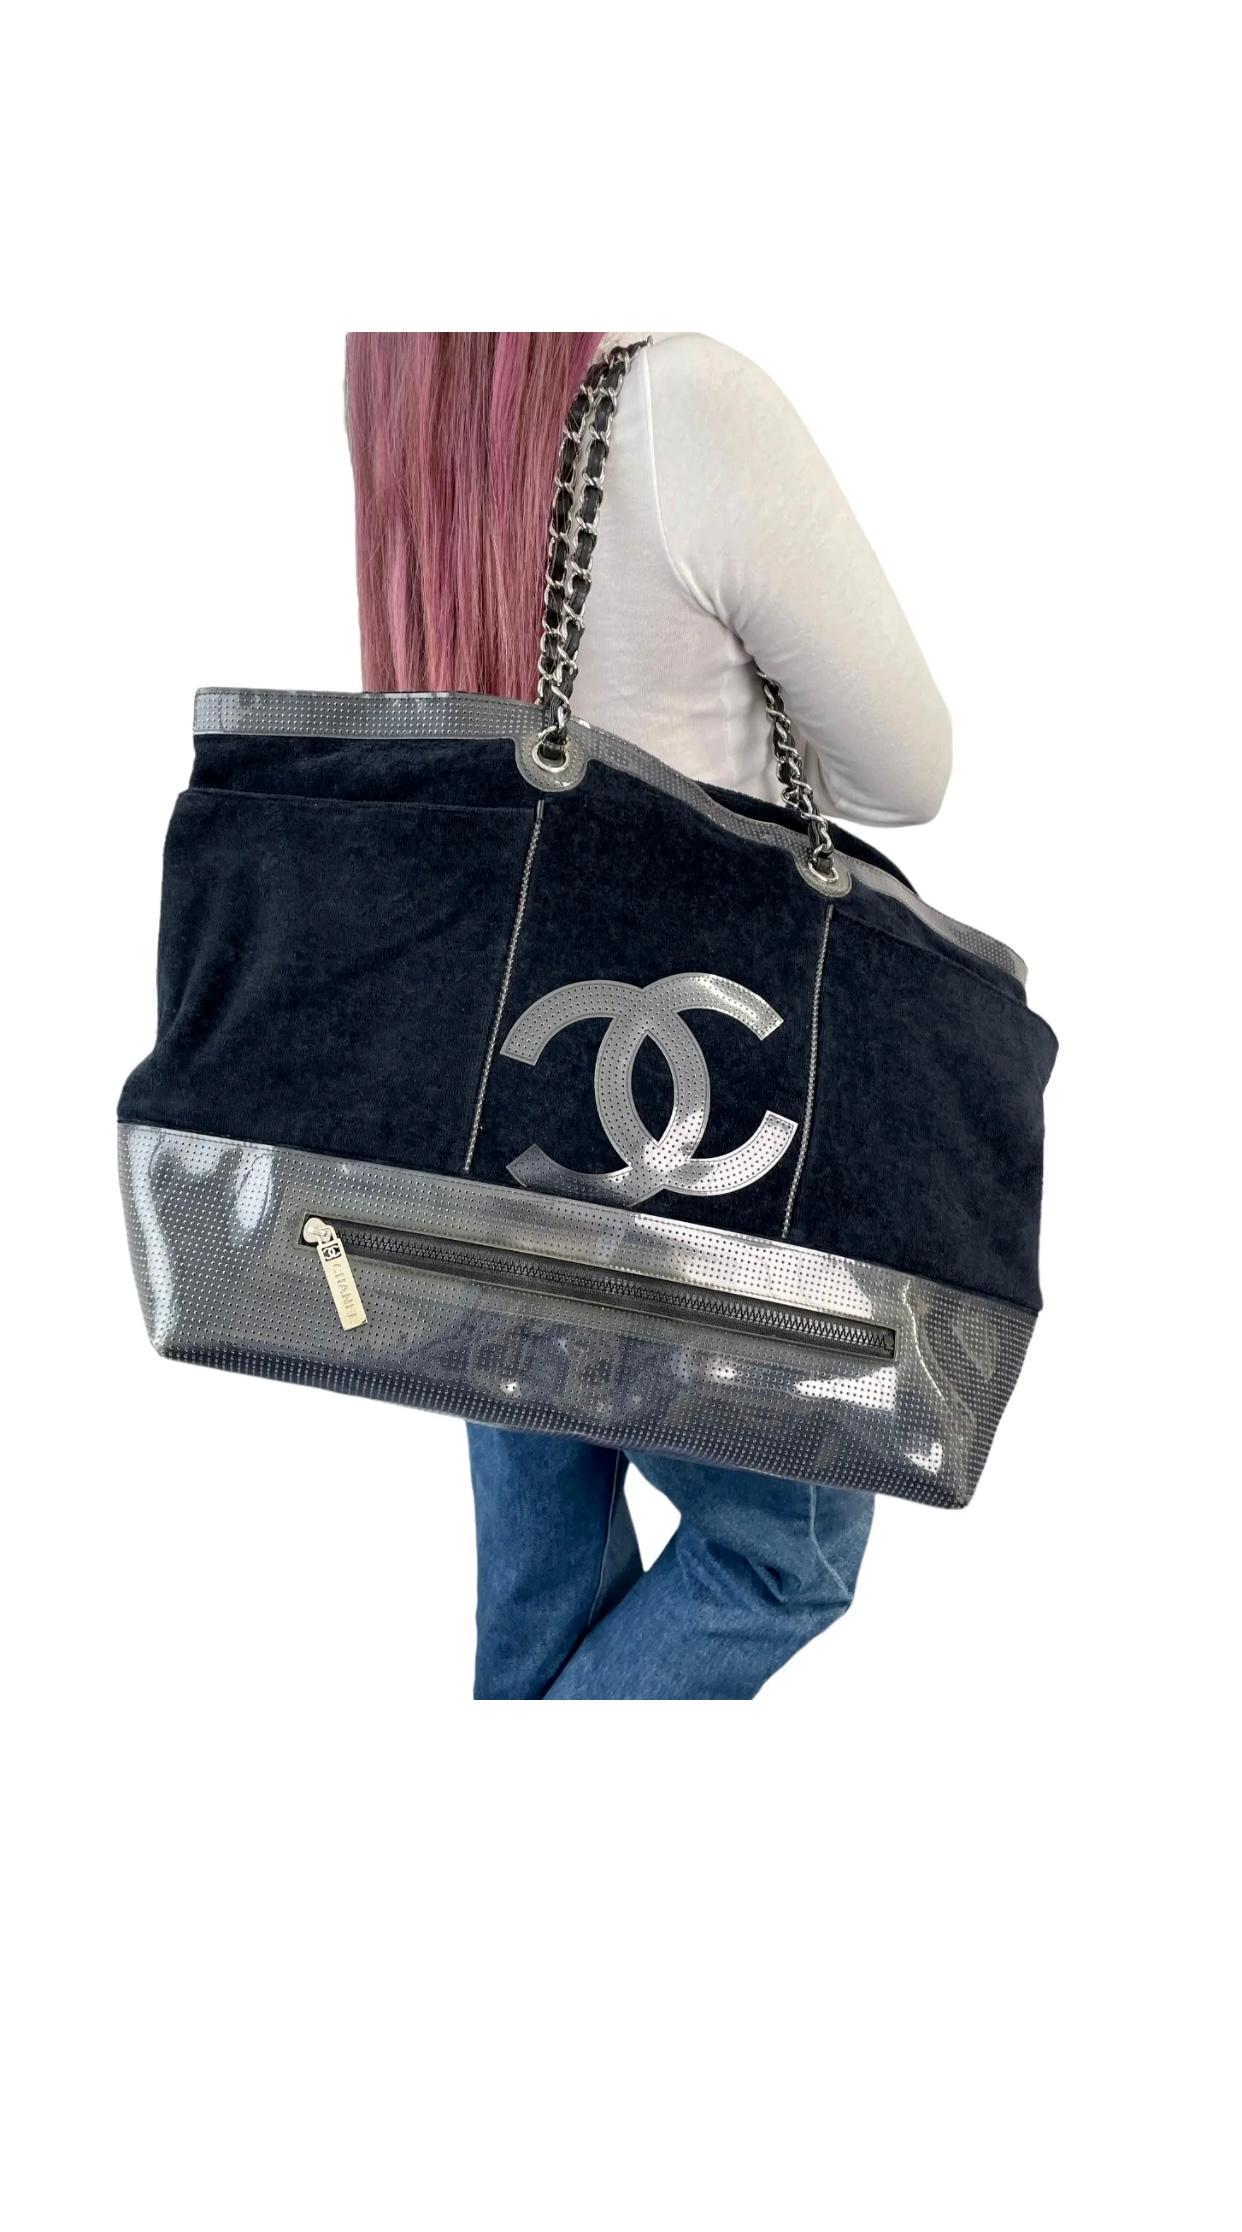 Vintage Rare Chanel Plush Terry Cloth Maxi Weekender Travel Beach Shopper Tote For Sale 11